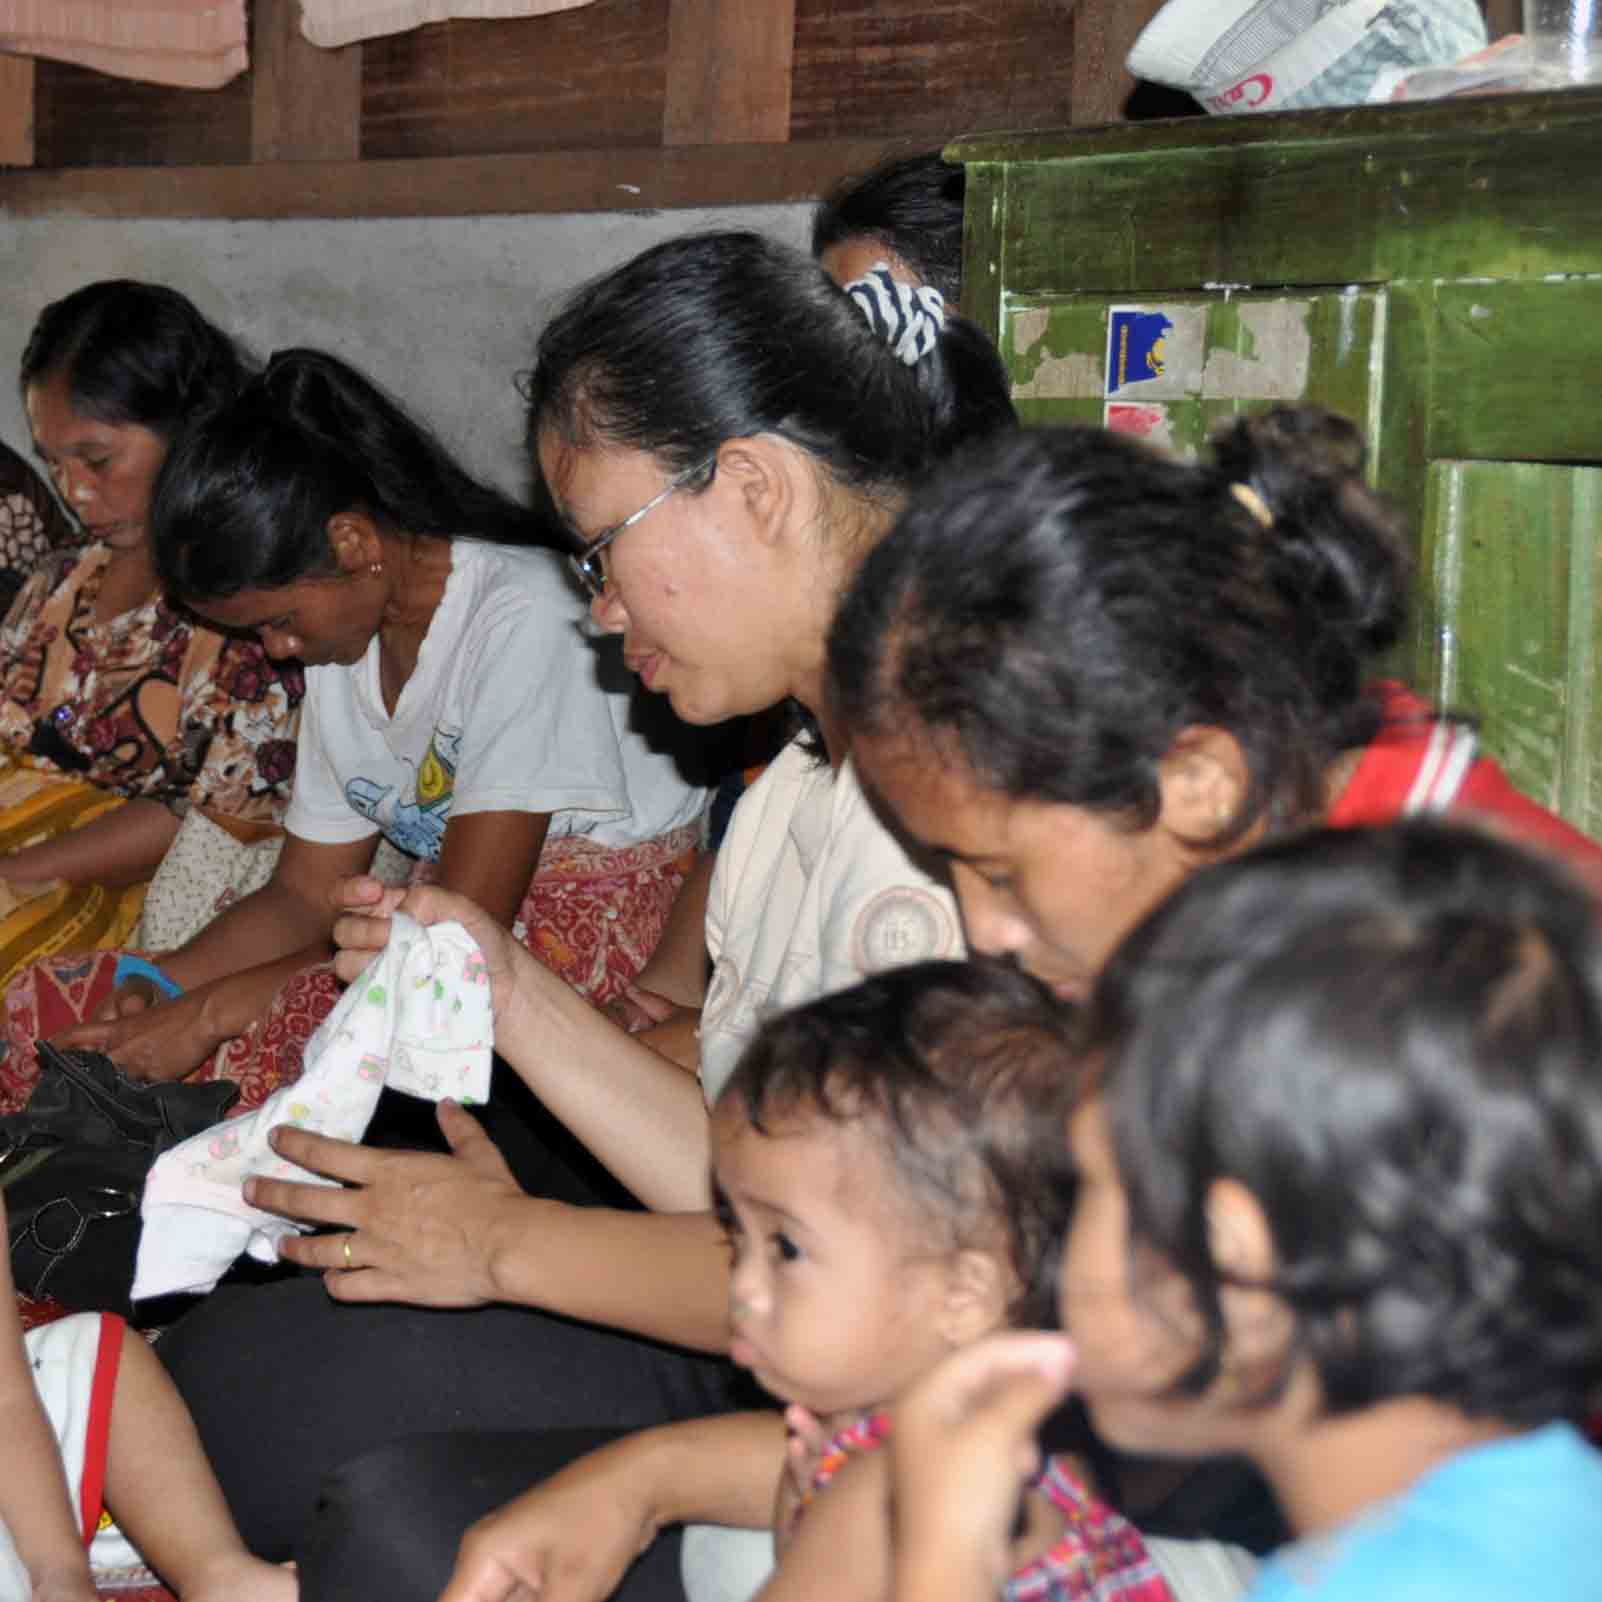 Christians in Indonesia gather in a house church meeting.